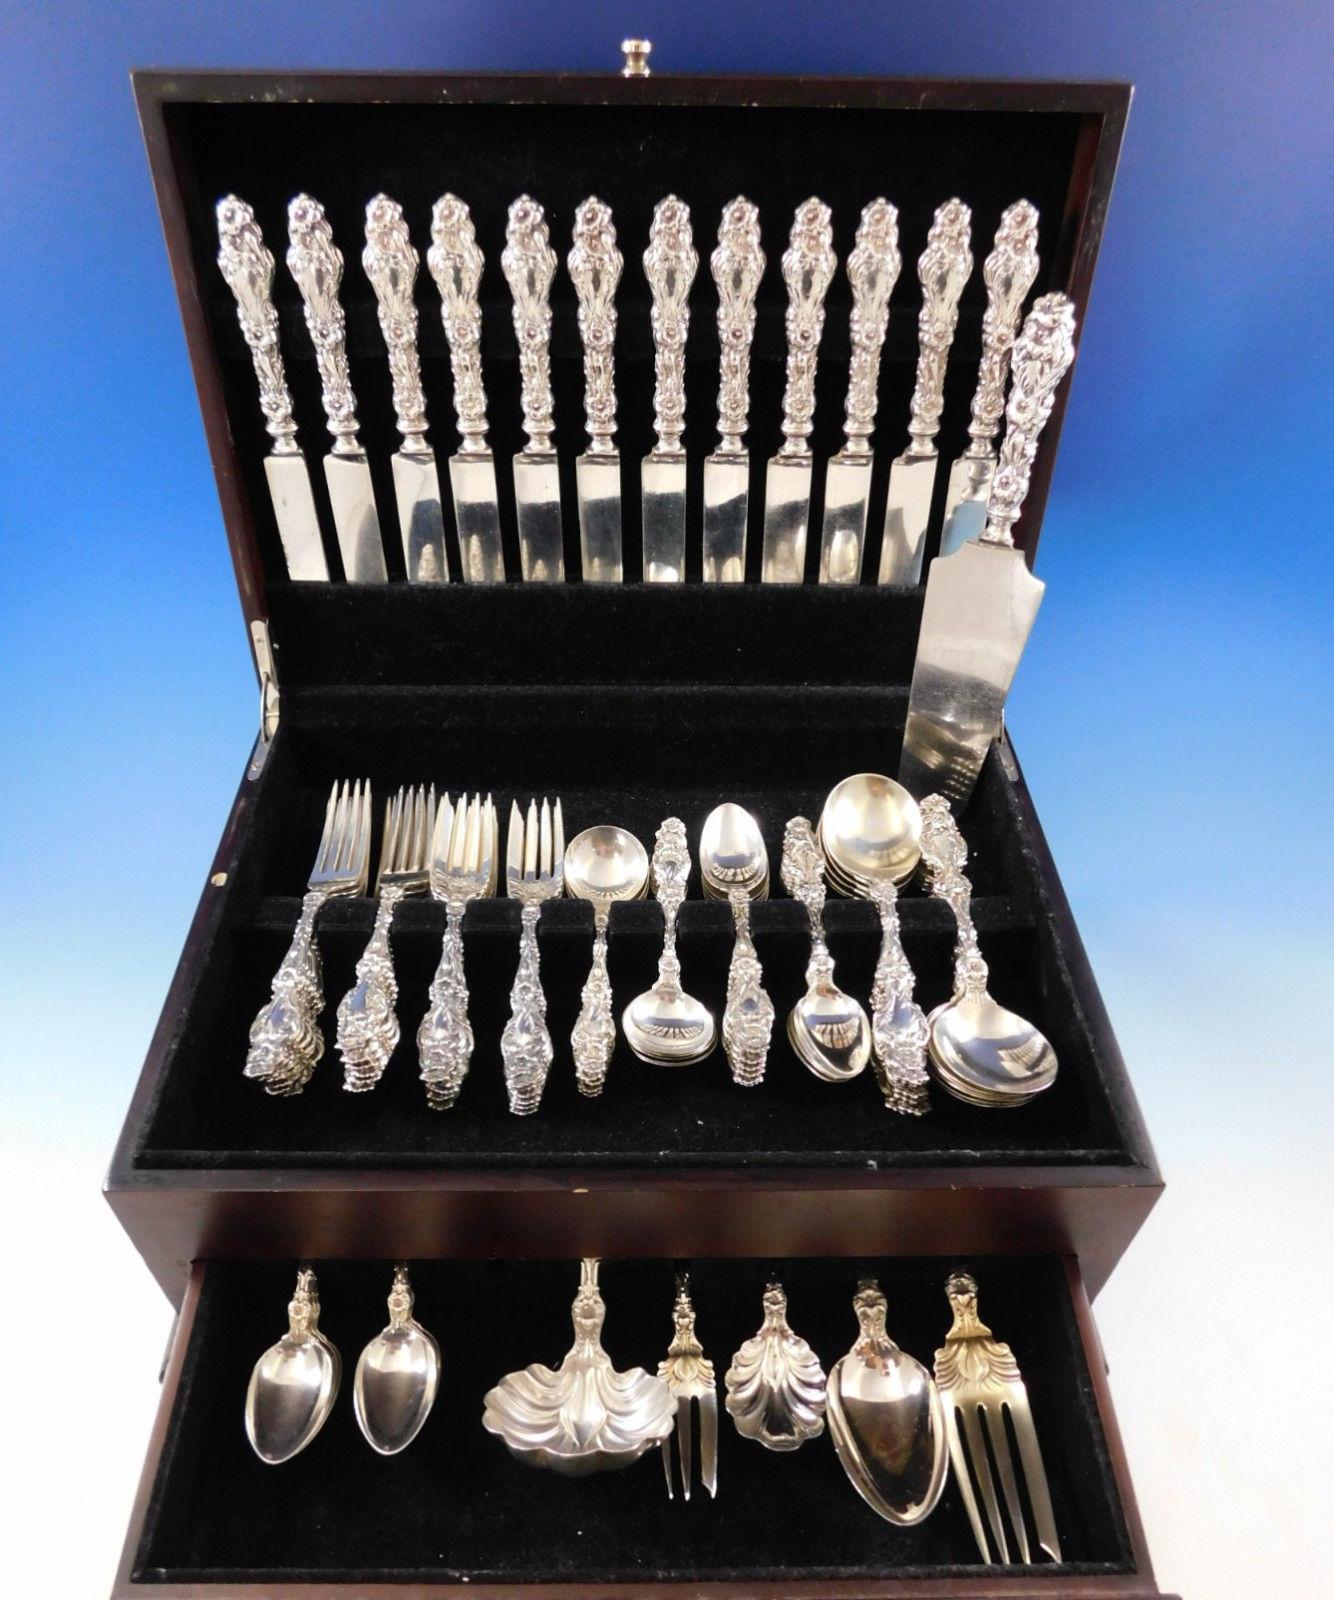 Outstanding early Lily by whiting sterling silver flatware set with desirable hand cast knives - 90 pieces total. This set includes:

12 knives with wide, hand cast handles, 8 3/4